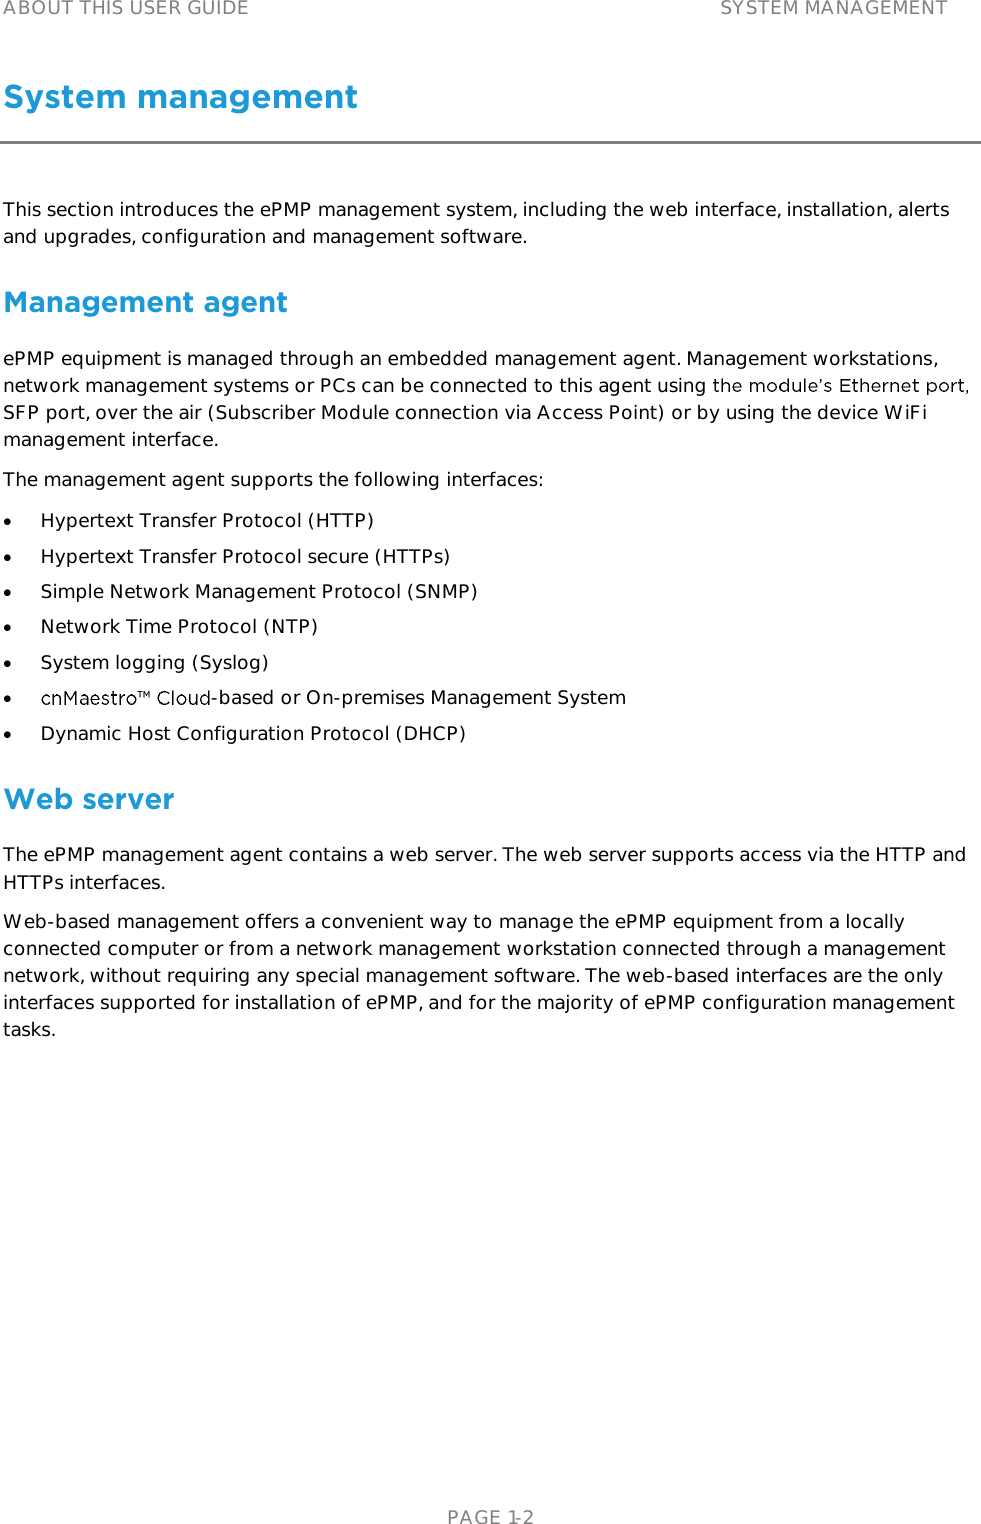 ABOUT THIS USER GUIDE SYSTEM MANAGEMENT   PAGE 1-2 System management   This section introduces the ePMP management system, including the web interface, installation, alerts and upgrades, configuration and management software. Management agent ePMP equipment is managed through an embedded management agent. Management workstations, network management systems or PCs can be connected to this agent using SFP port, over the air (Subscriber Module connection via Access Point) or by using the device WiFi management interface. The management agent supports the following interfaces:  Hypertext Transfer Protocol (HTTP)  Hypertext Transfer Protocol secure (HTTPs)  Simple Network Management Protocol (SNMP)  Network Time Protocol (NTP)  System logging (Syslog)  -based or On-premises Management System   Dynamic Host Configuration Protocol (DHCP) Web server The ePMP management agent contains a web server. The web server supports access via the HTTP and HTTPs interfaces. Web-based management offers a convenient way to manage the ePMP equipment from a locally connected computer or from a network management workstation connected through a management network, without requiring any special management software. The web-based interfaces are the only interfaces supported for installation of ePMP, and for the majority of ePMP configuration management tasks. 